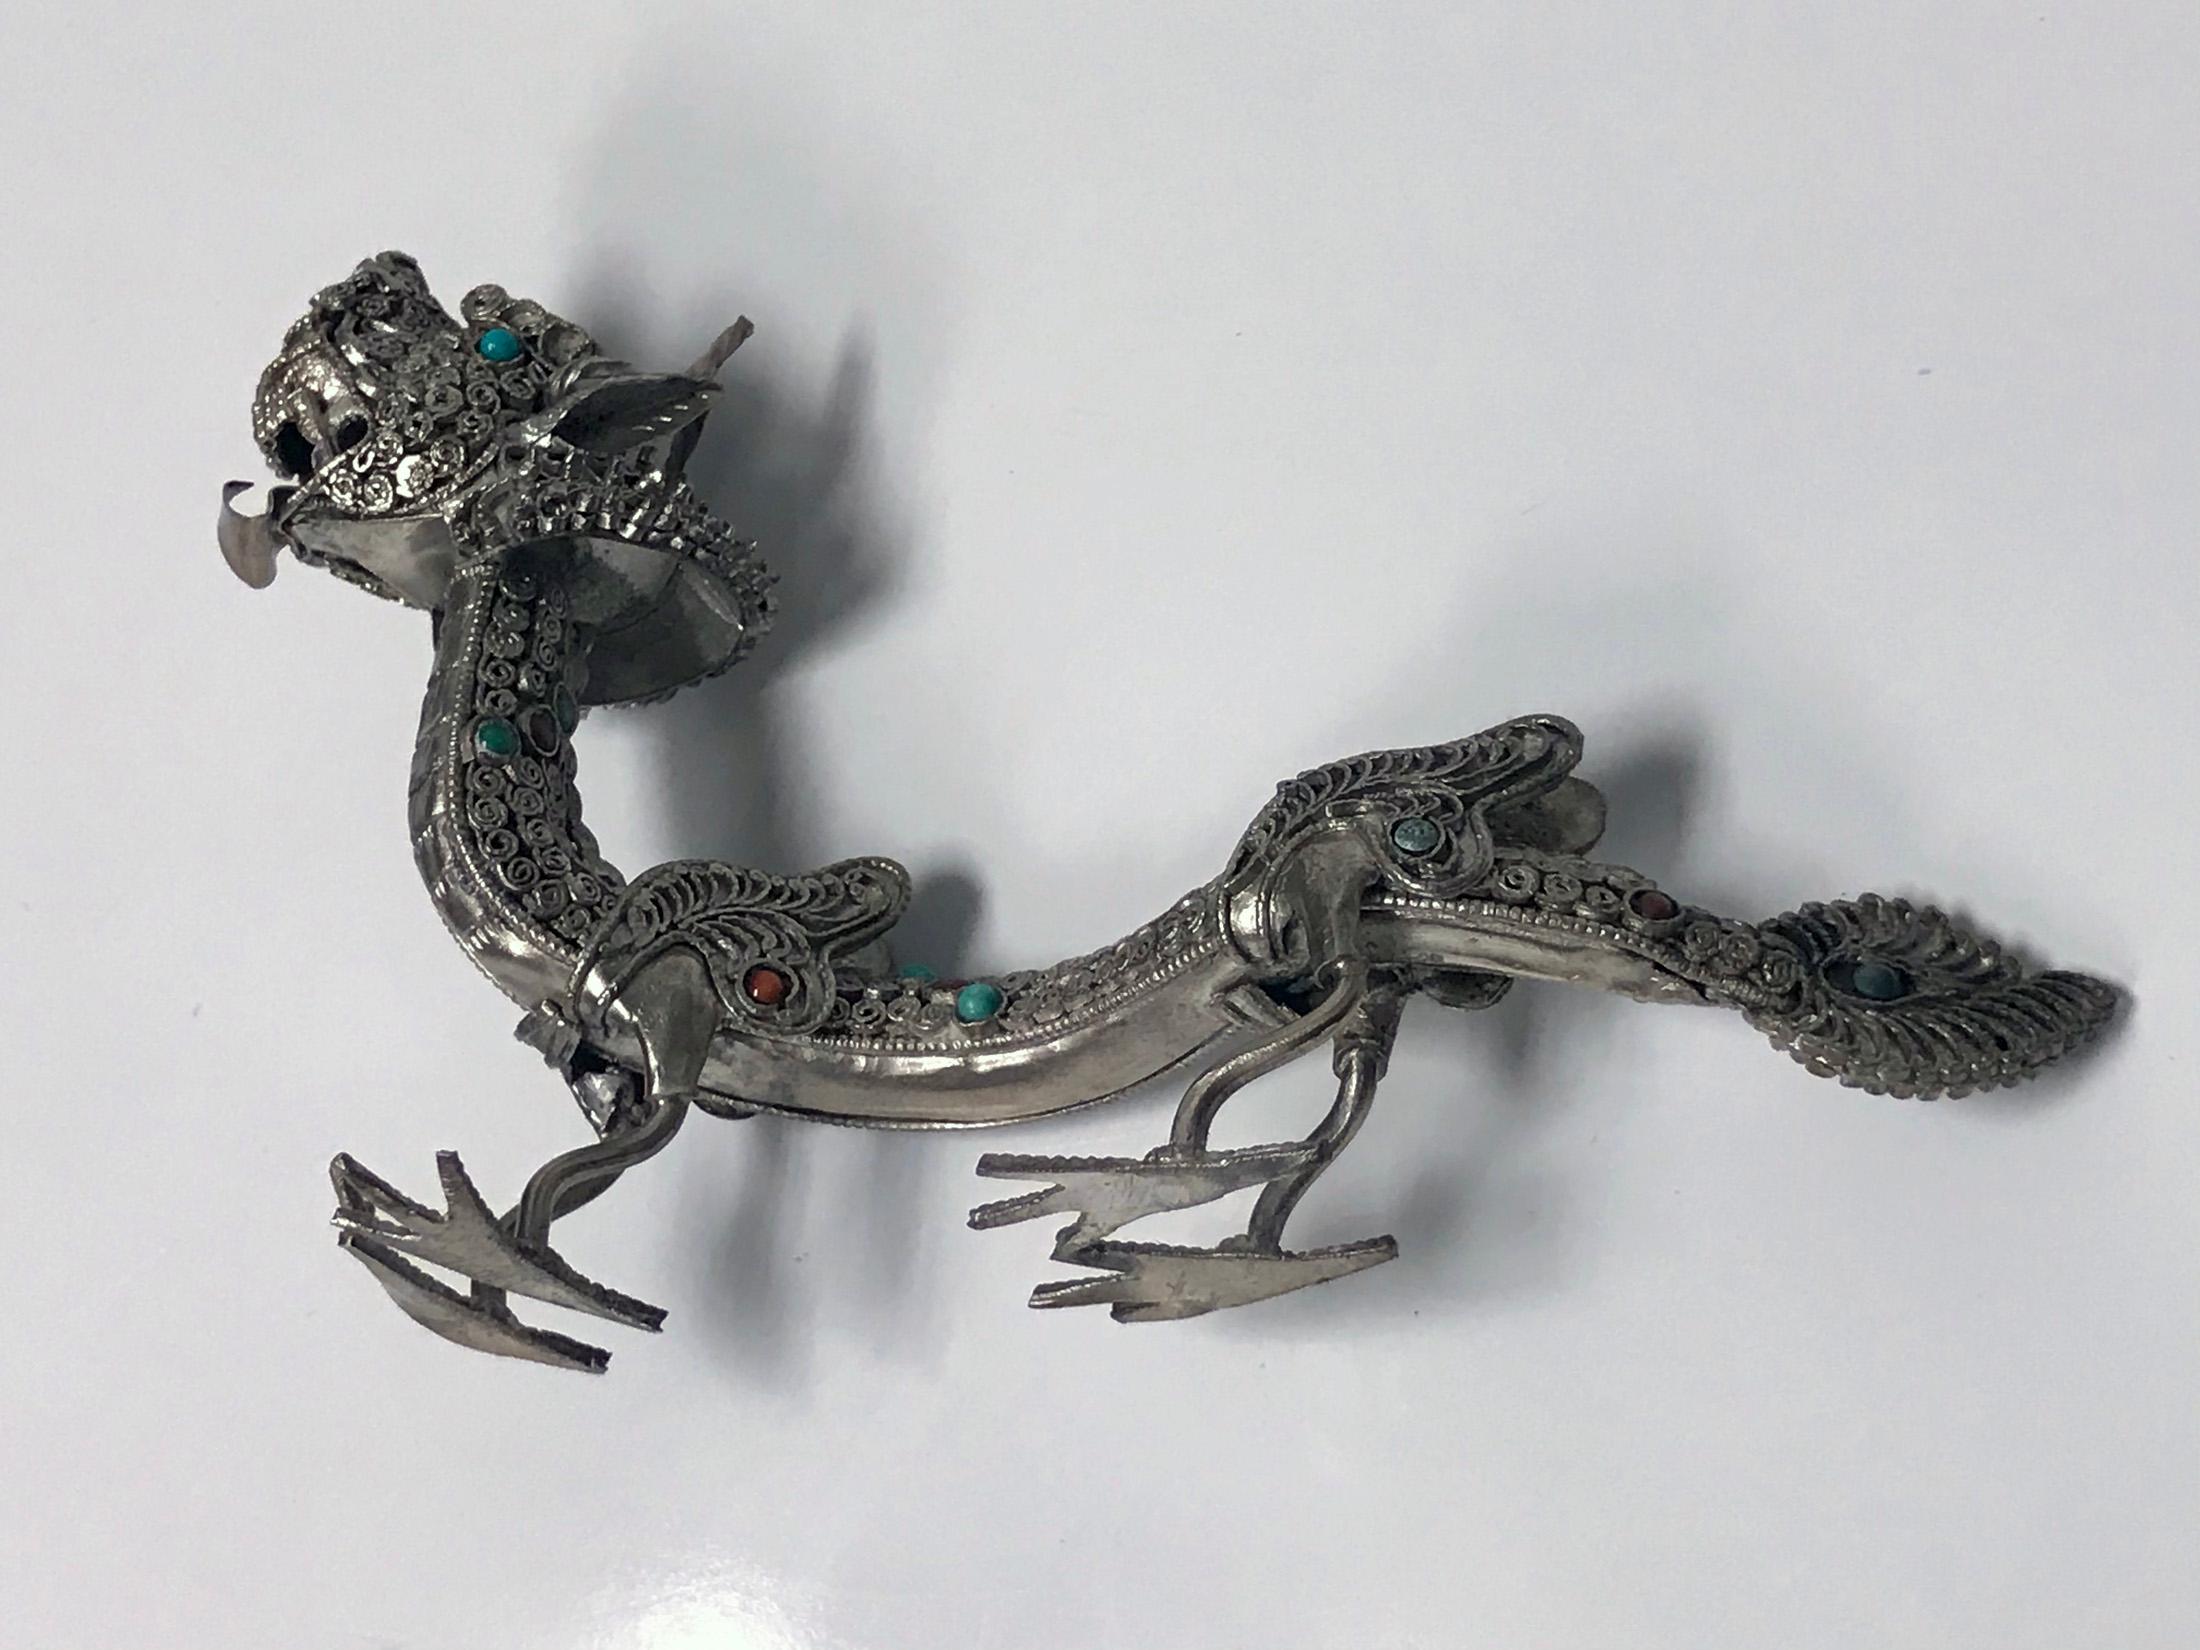 925 Sterling silver and multi-color stone inlay standing Dragon, probably Chinese, circa 1950. The dragon is highly detailed with a Fine silver wire work filigree body, wings, hands and claw feet. The silver set with numerous orange and turquoise